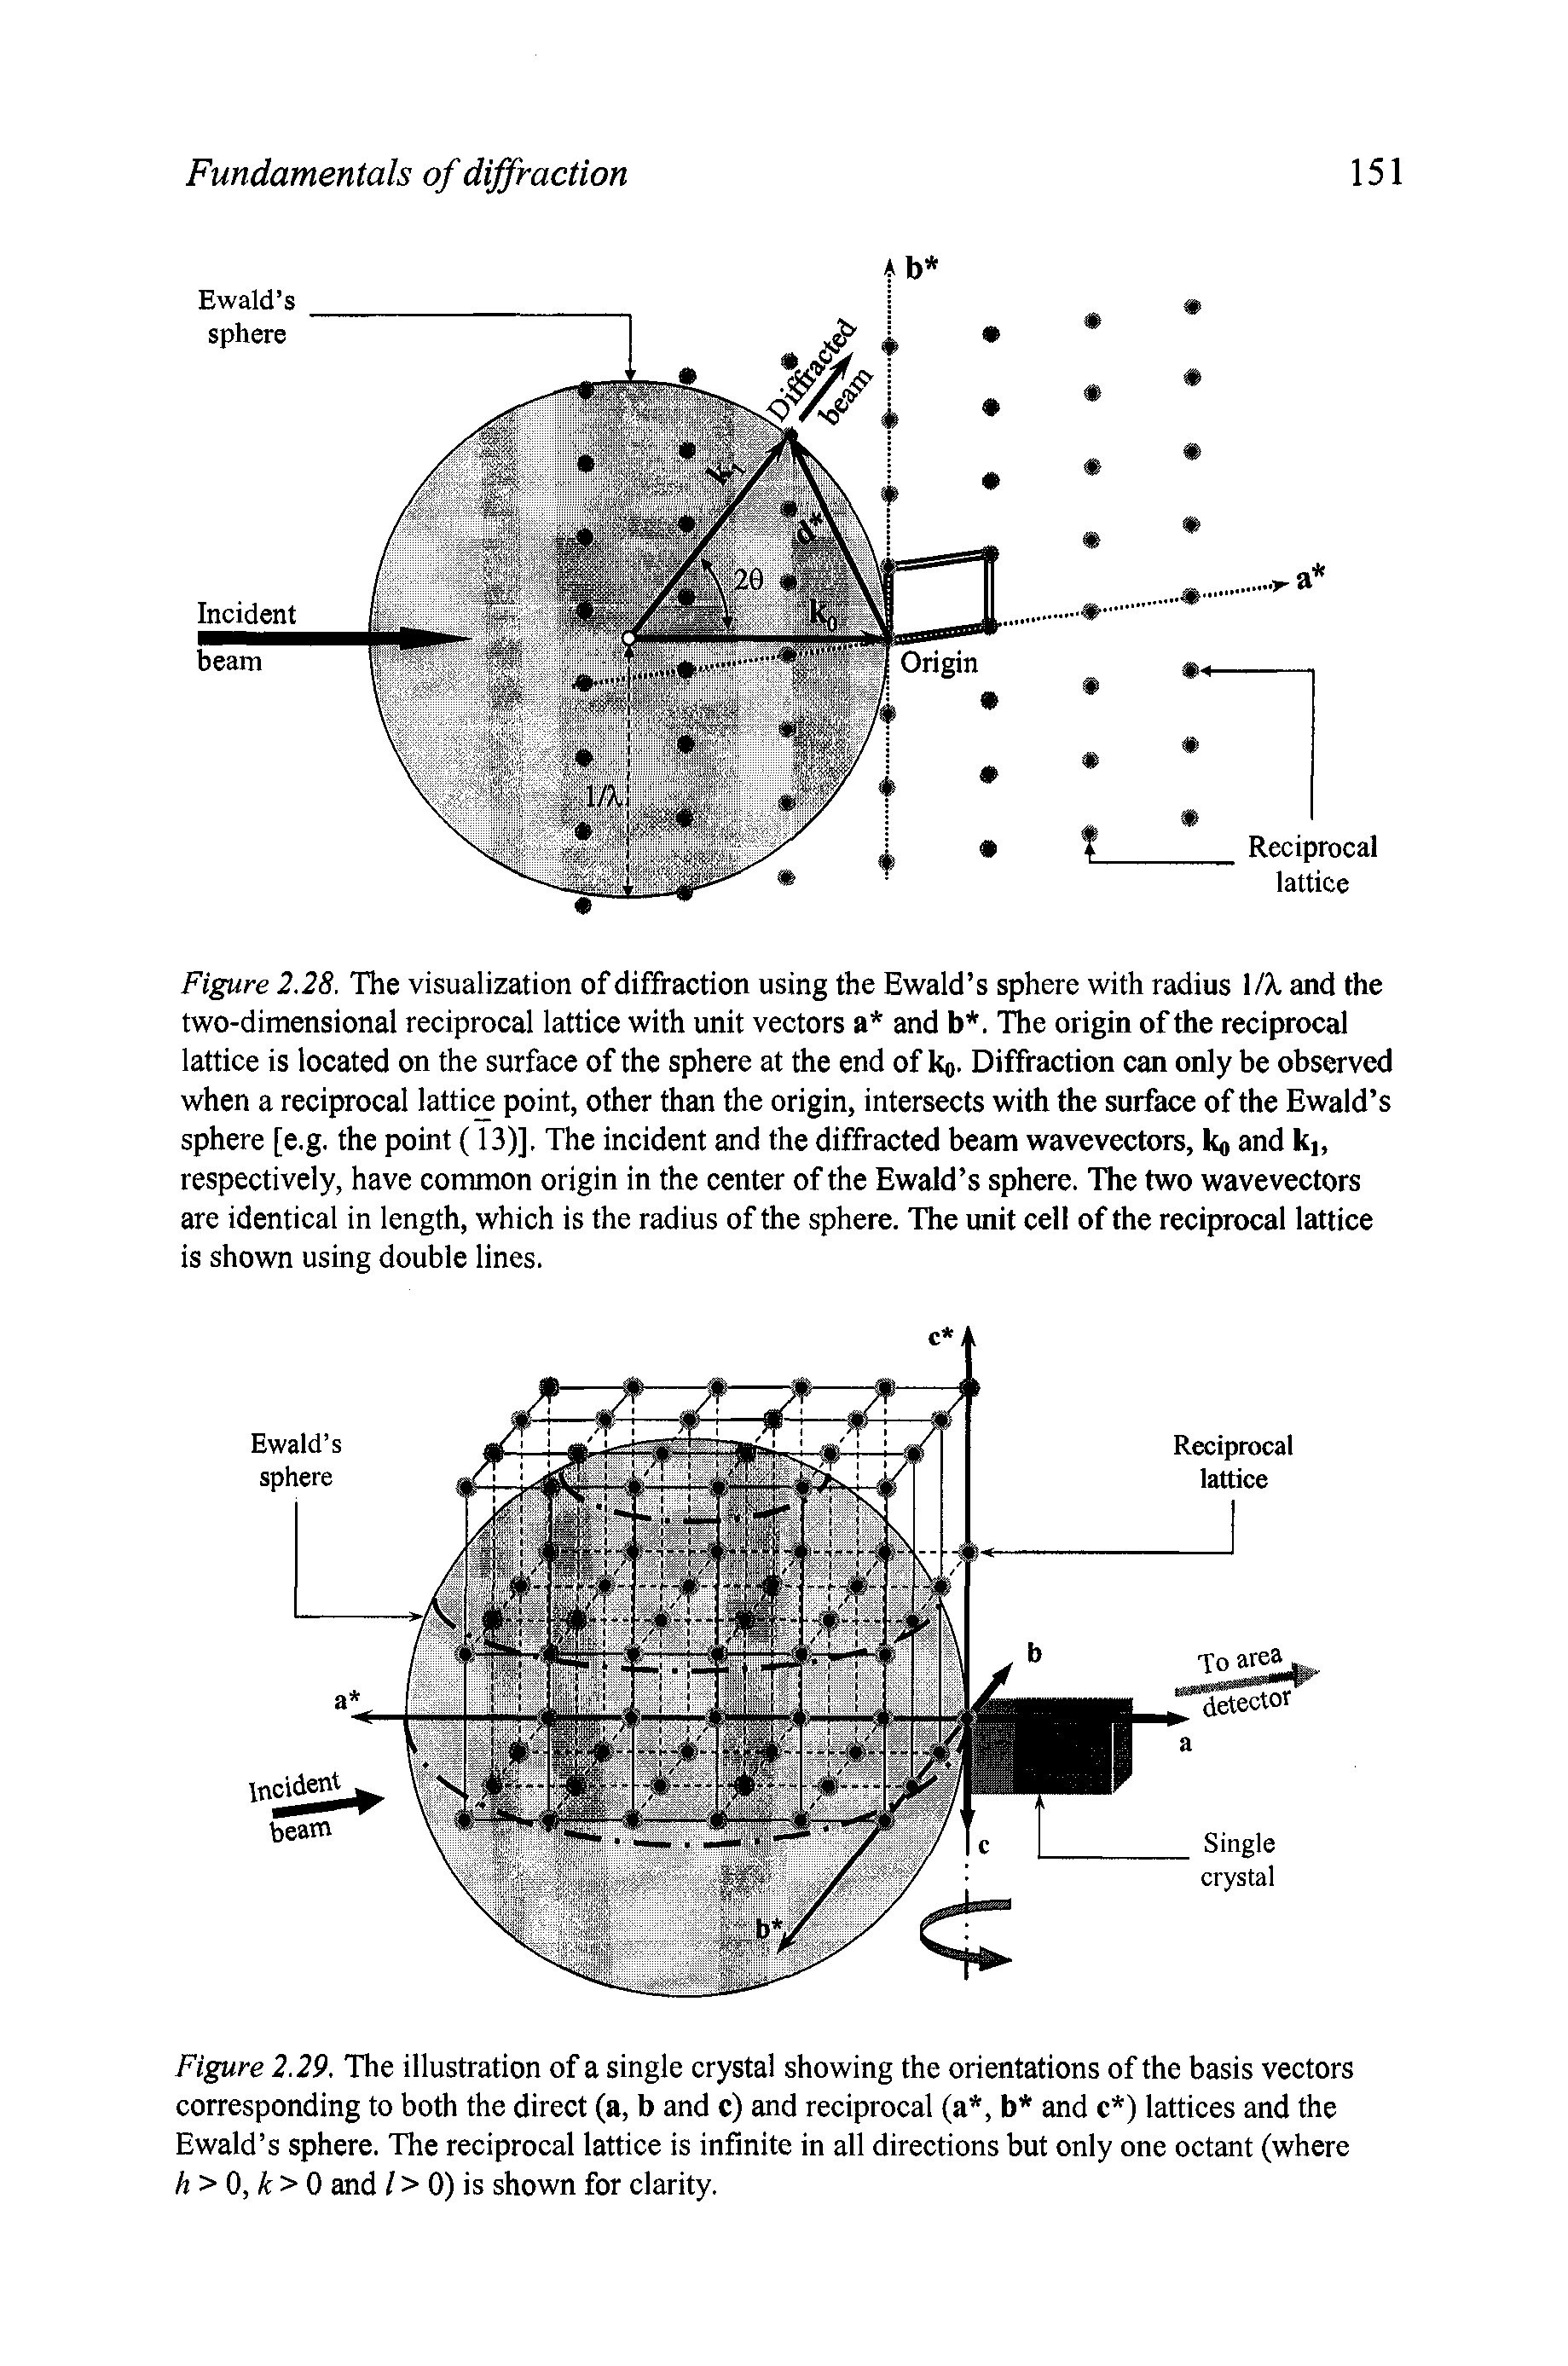 Figure 2.28. The visualization of diffraction using the Ewald s sphere with radius MX and the two-dimensional reciprocal lattice with unit vectors a and b. The origin of the reciprocal lattice is located on the surface of the sphere at the end of ko. Diffraction can only be observed when a reciprocal lattice point, other than the origin, intersects with the surface of the Ewald s sphere [e.g. the point (13)], The incident and the diffracted beam wavevectors, k and ki, respectively, have common origin in the center of the Ewald s sphere. The two wavevectors are identical in length, which is the radius of the sphere. The unit cell of the reciprocal lattice is shown using double lines.